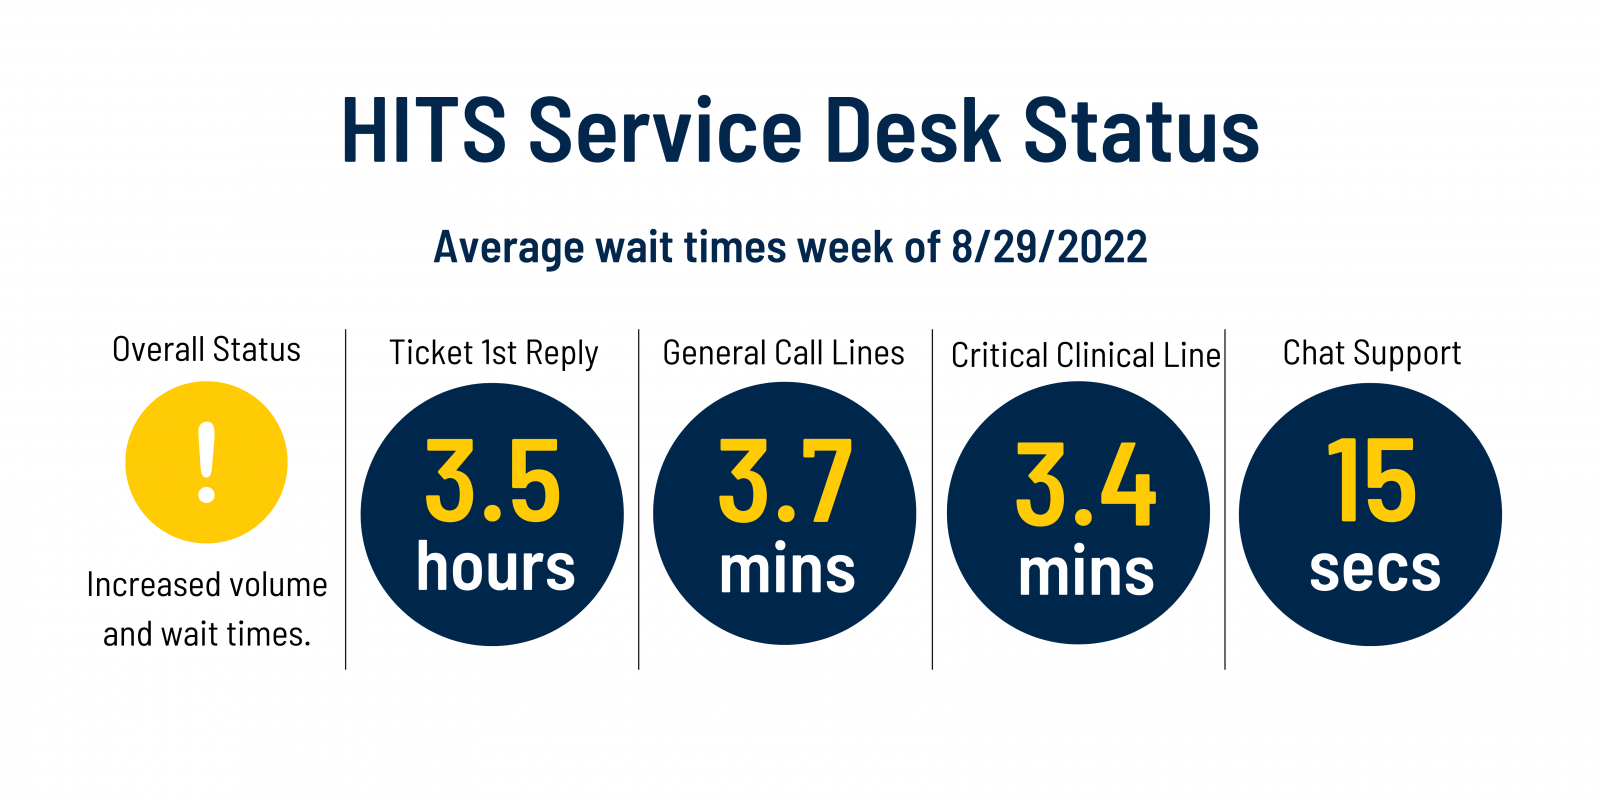 Service Desk current status is yellow. Expect increased volume and wait times. 